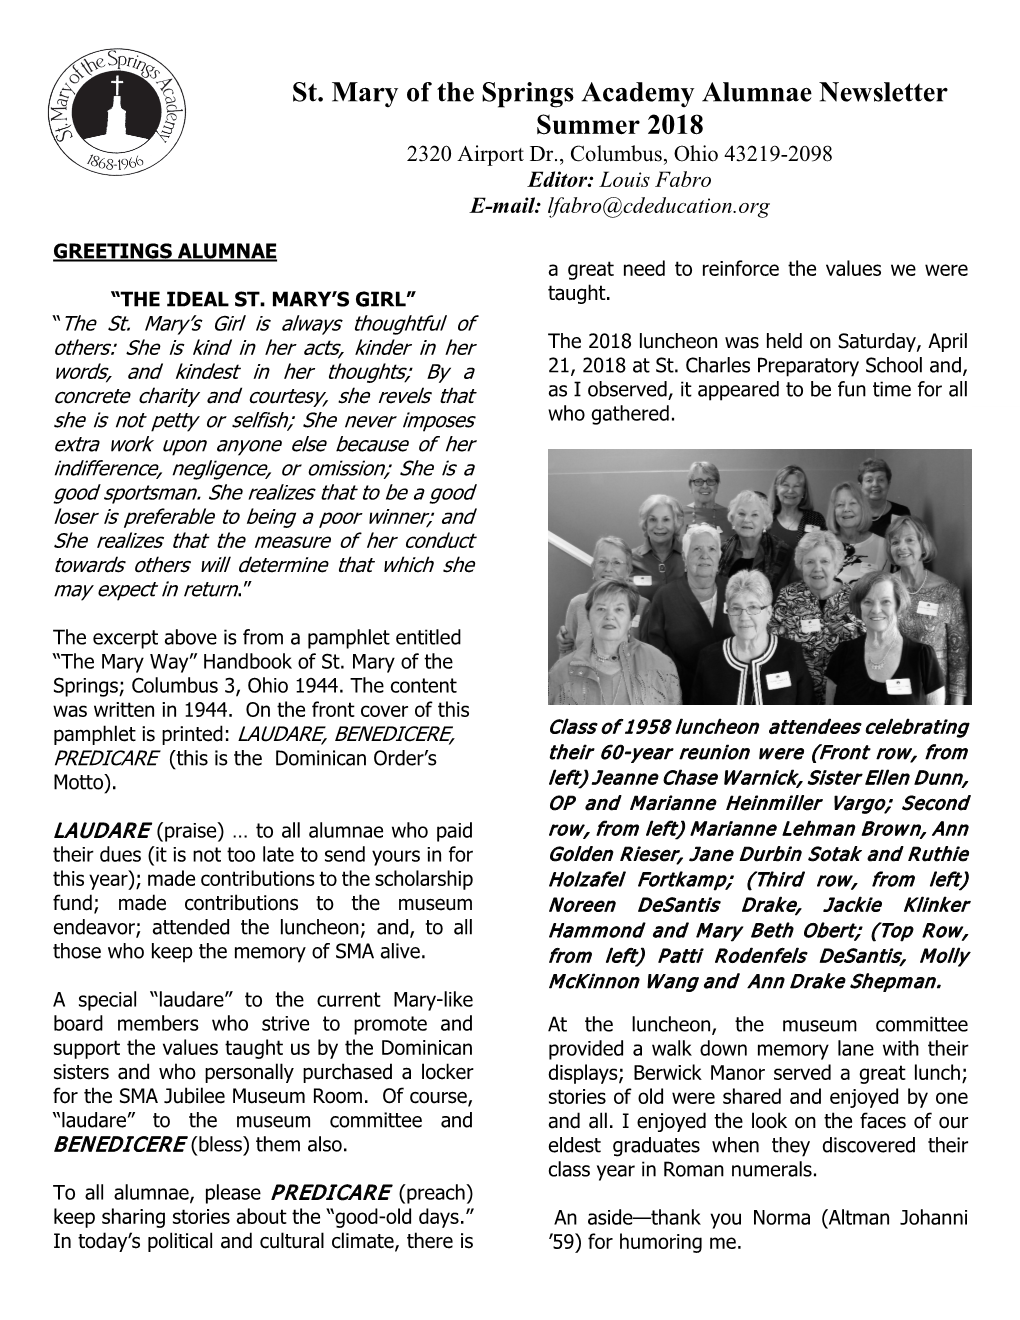 St. Mary of the Springs Academy Alumnae Newsletter Summer 2018 2320 Airport Dr., Columbus, Ohio 43219-2098 Editor: Louis Fabro E-Mail: Lfabro@Cdeducation.Org